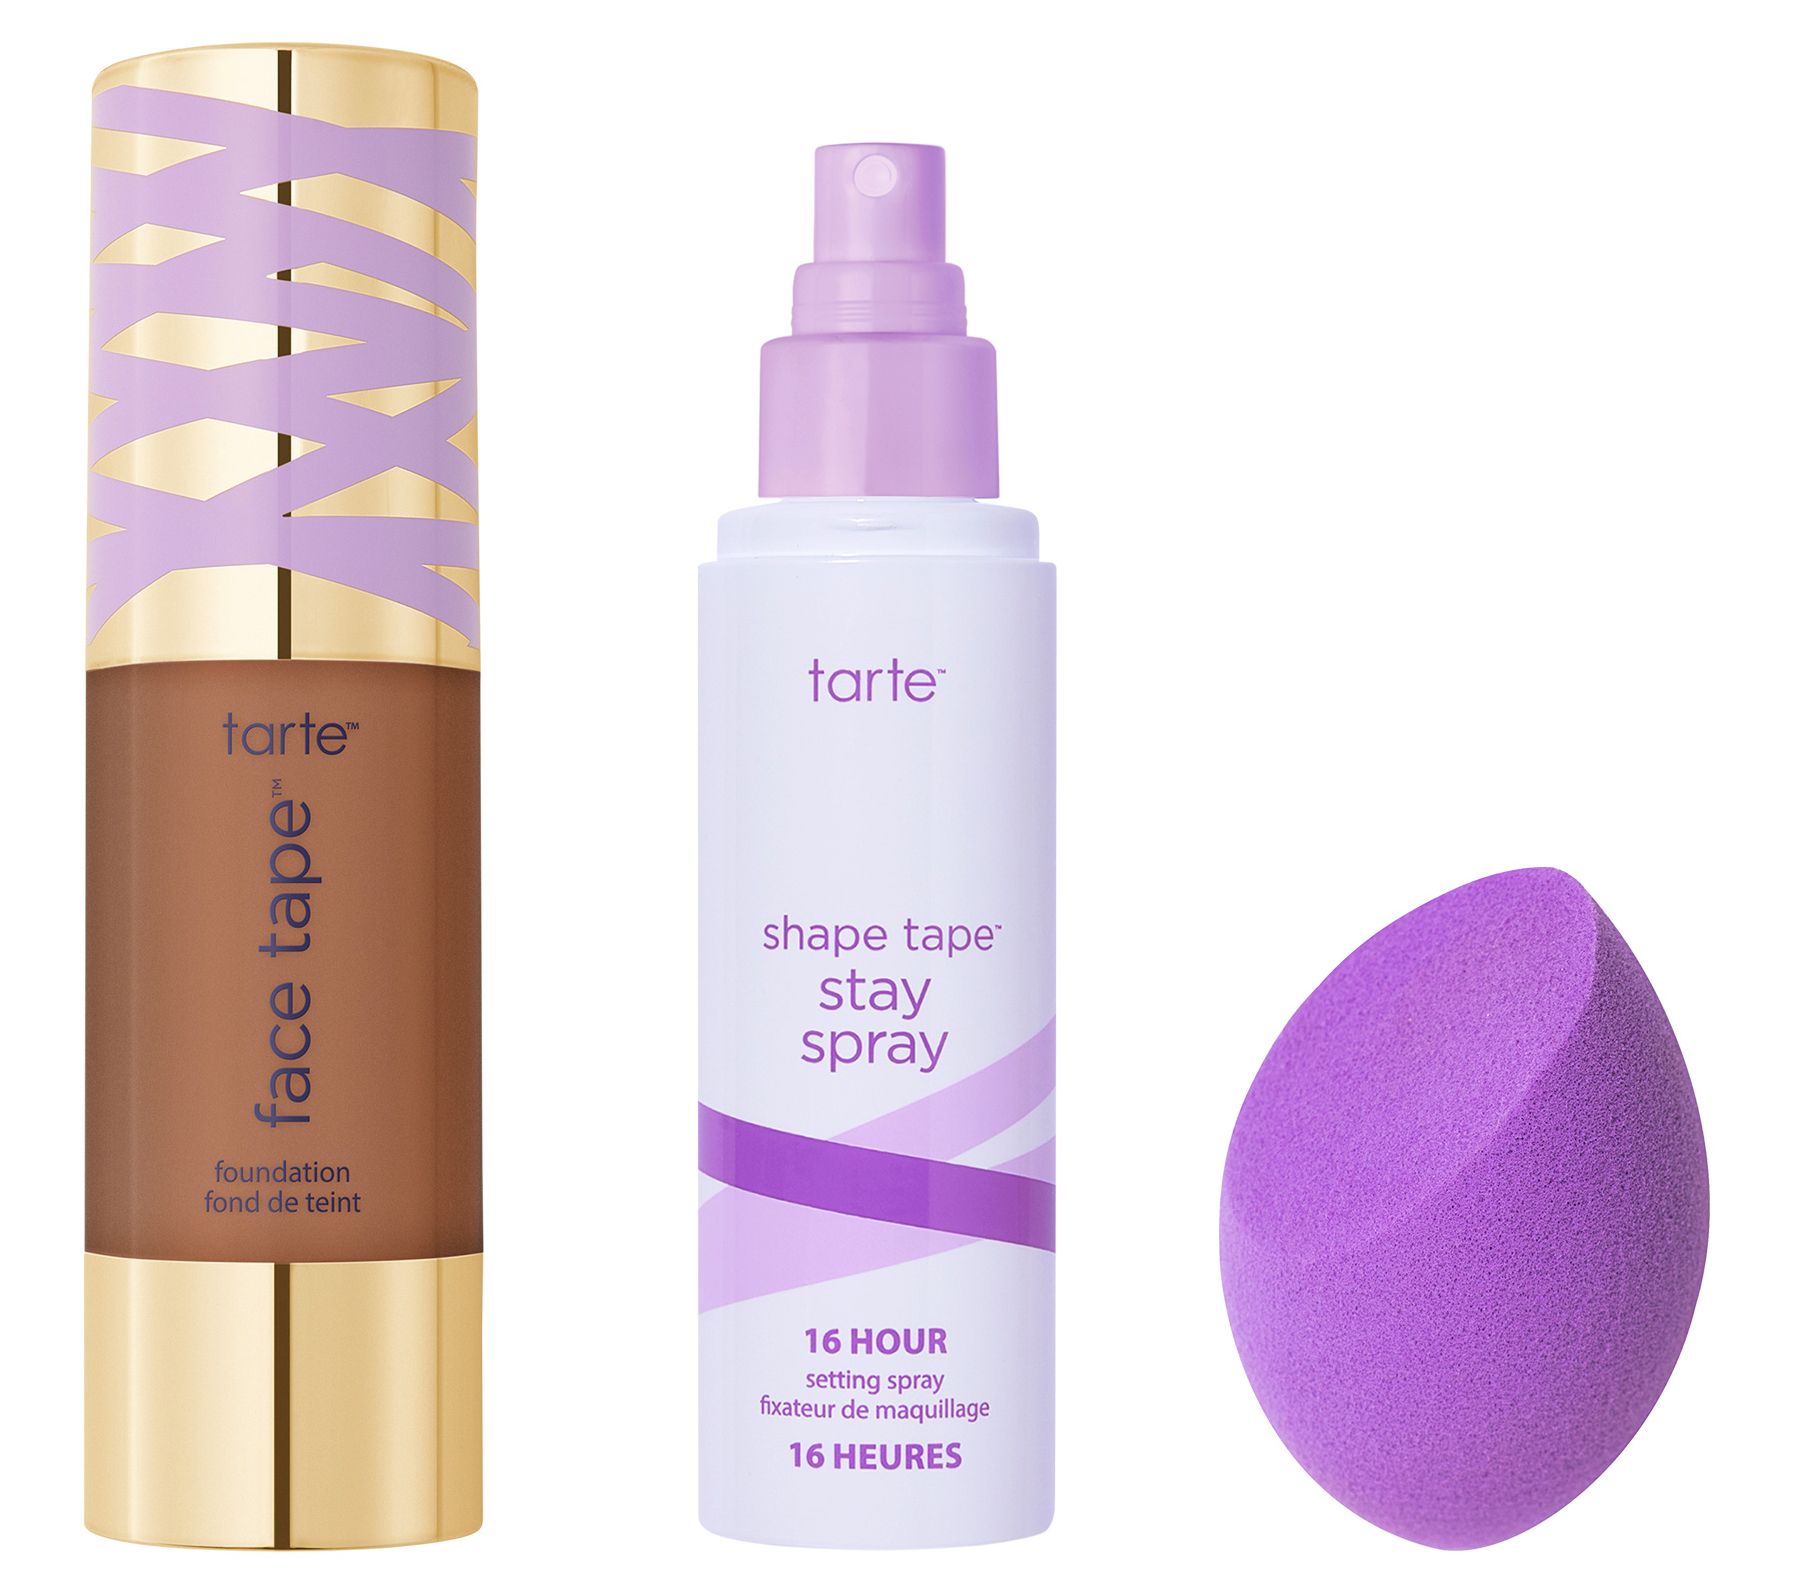 tarte Face Tape Foundation & Stay Spray Complexion Set 